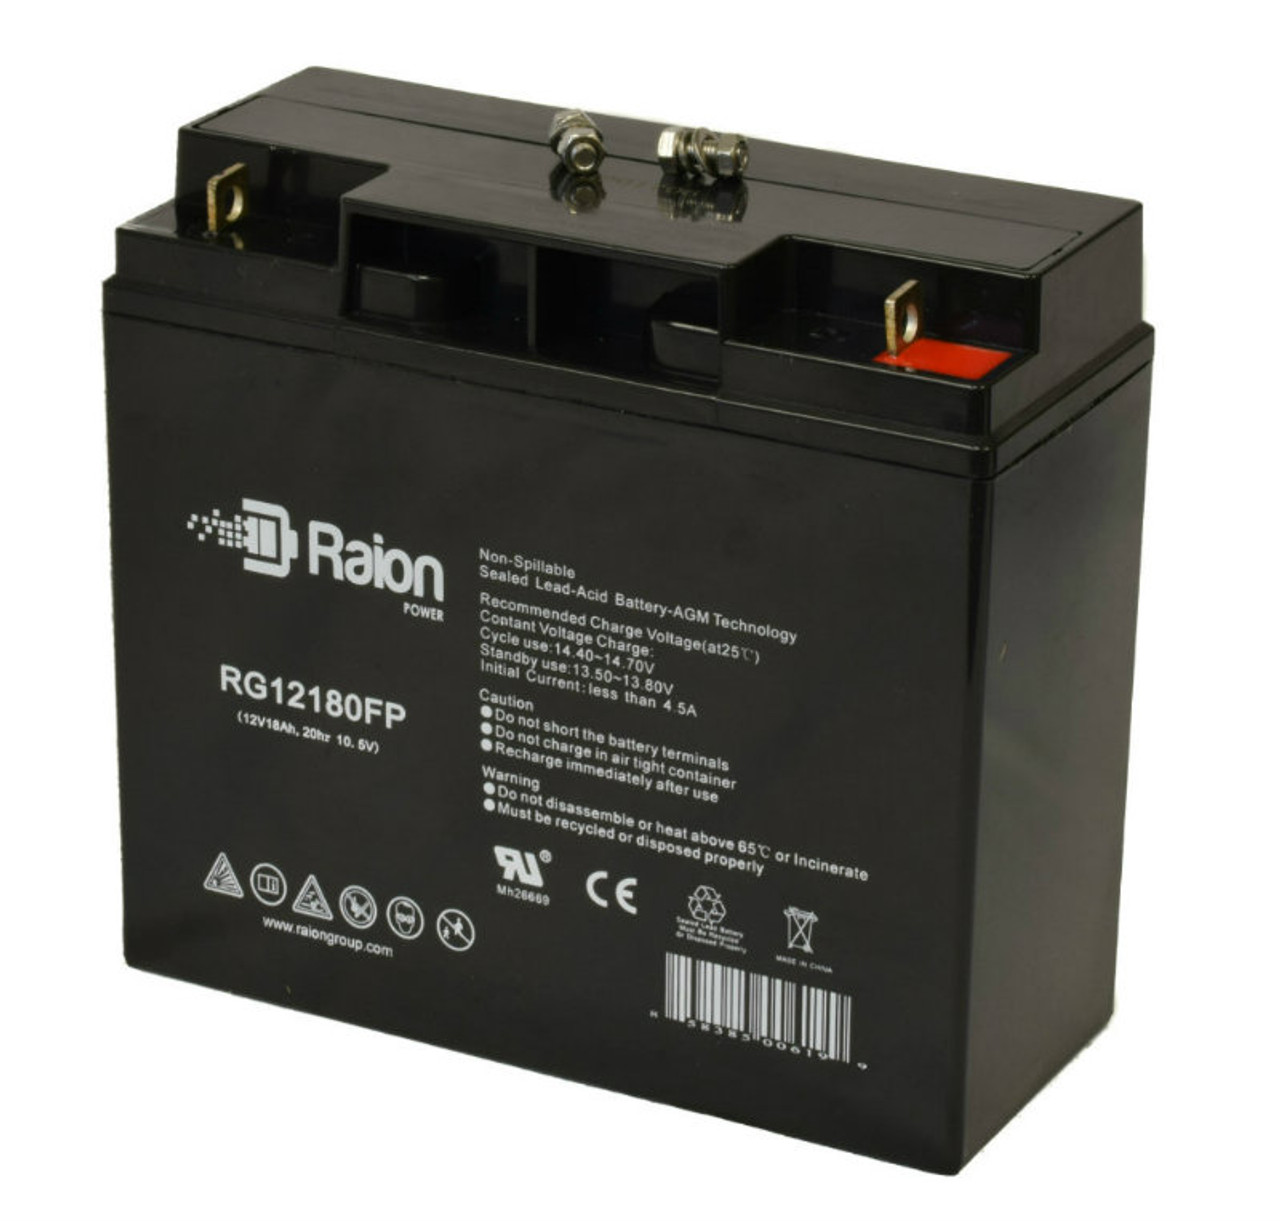 Raion Power Replacement 12V 18Ah Battery for Mule PM12170 - 1 Pack